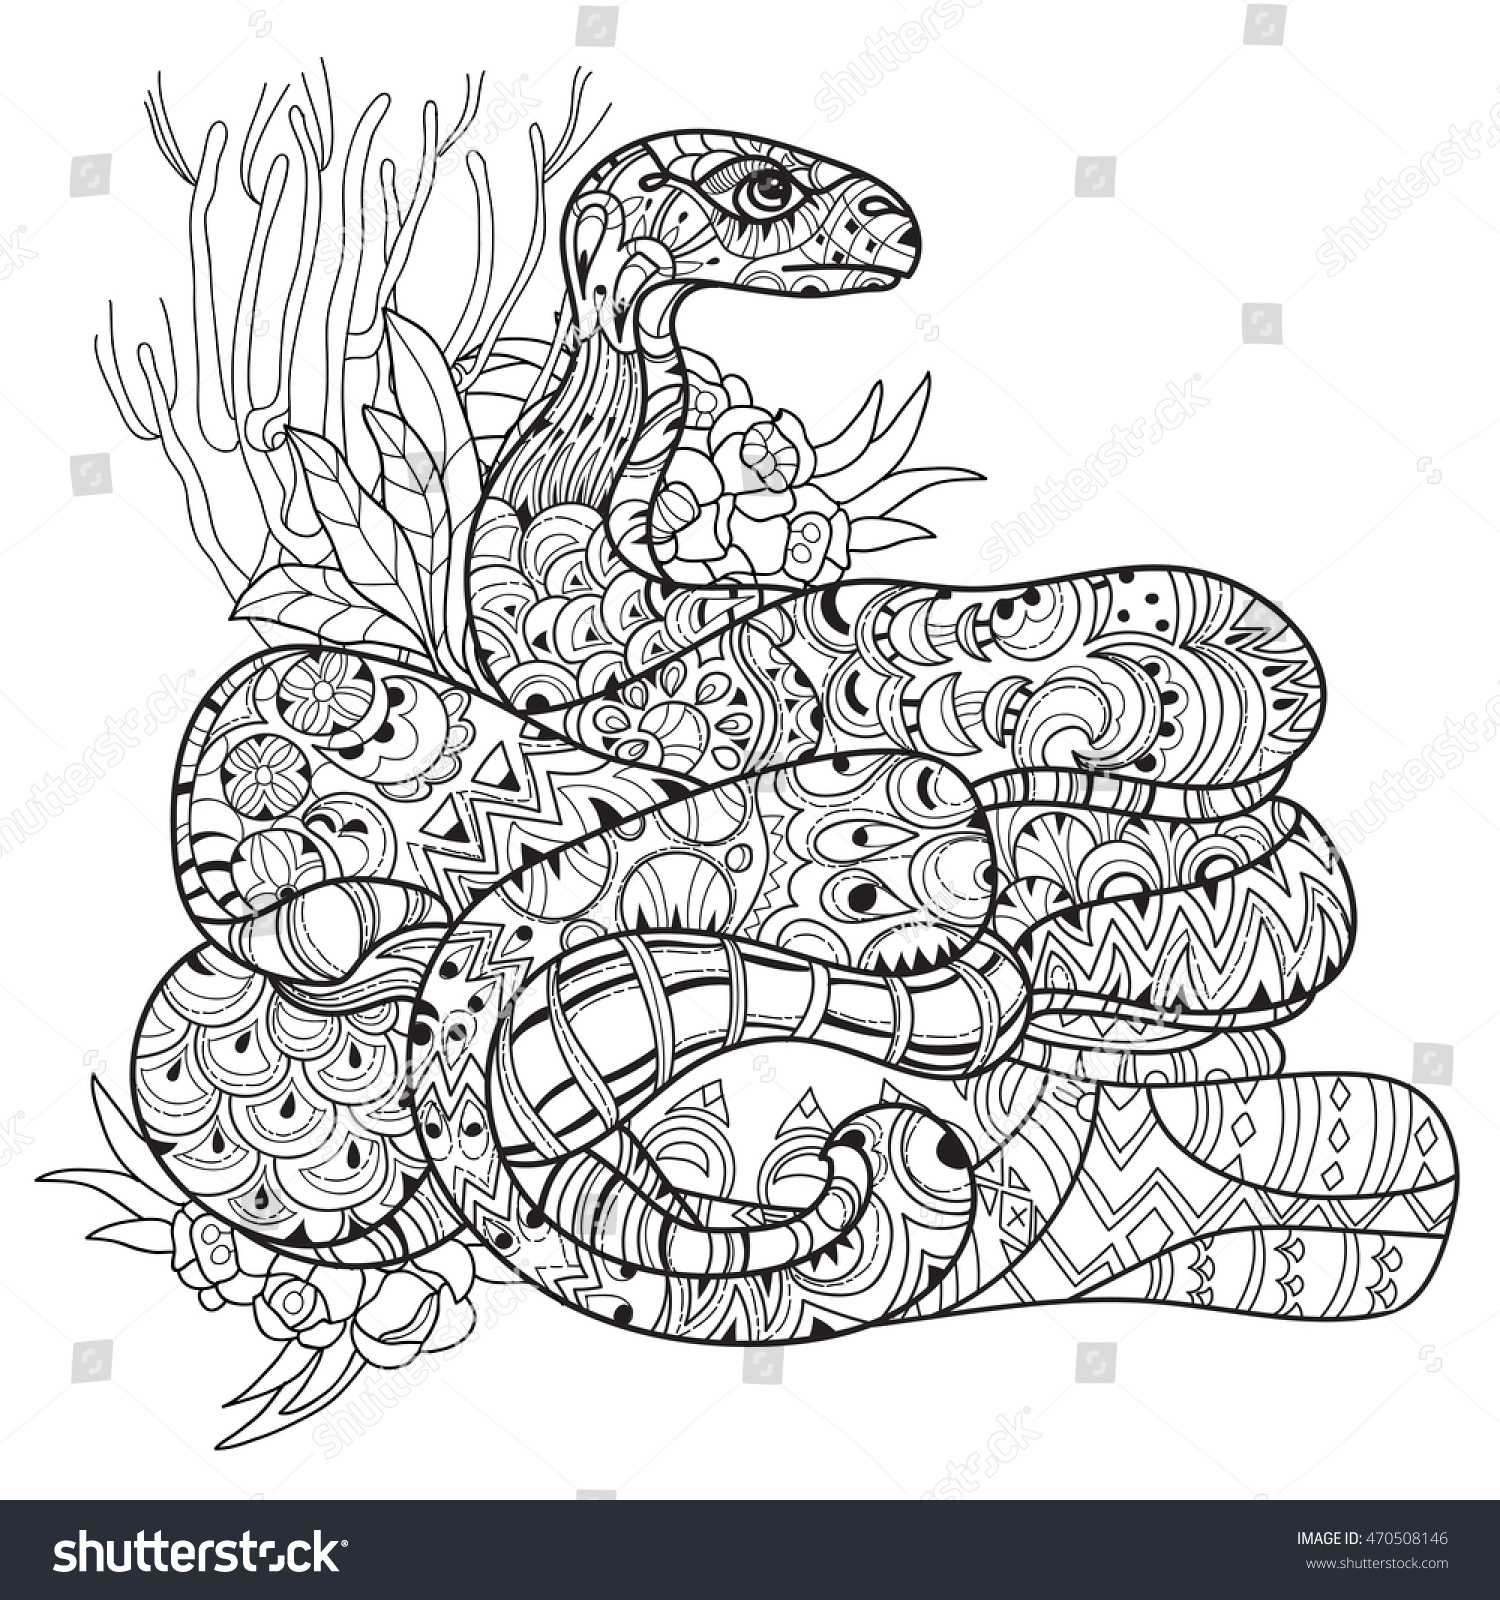 Hand Drawn Doodle Outline Anaconda Decorated Stock Vector 470508146 ...